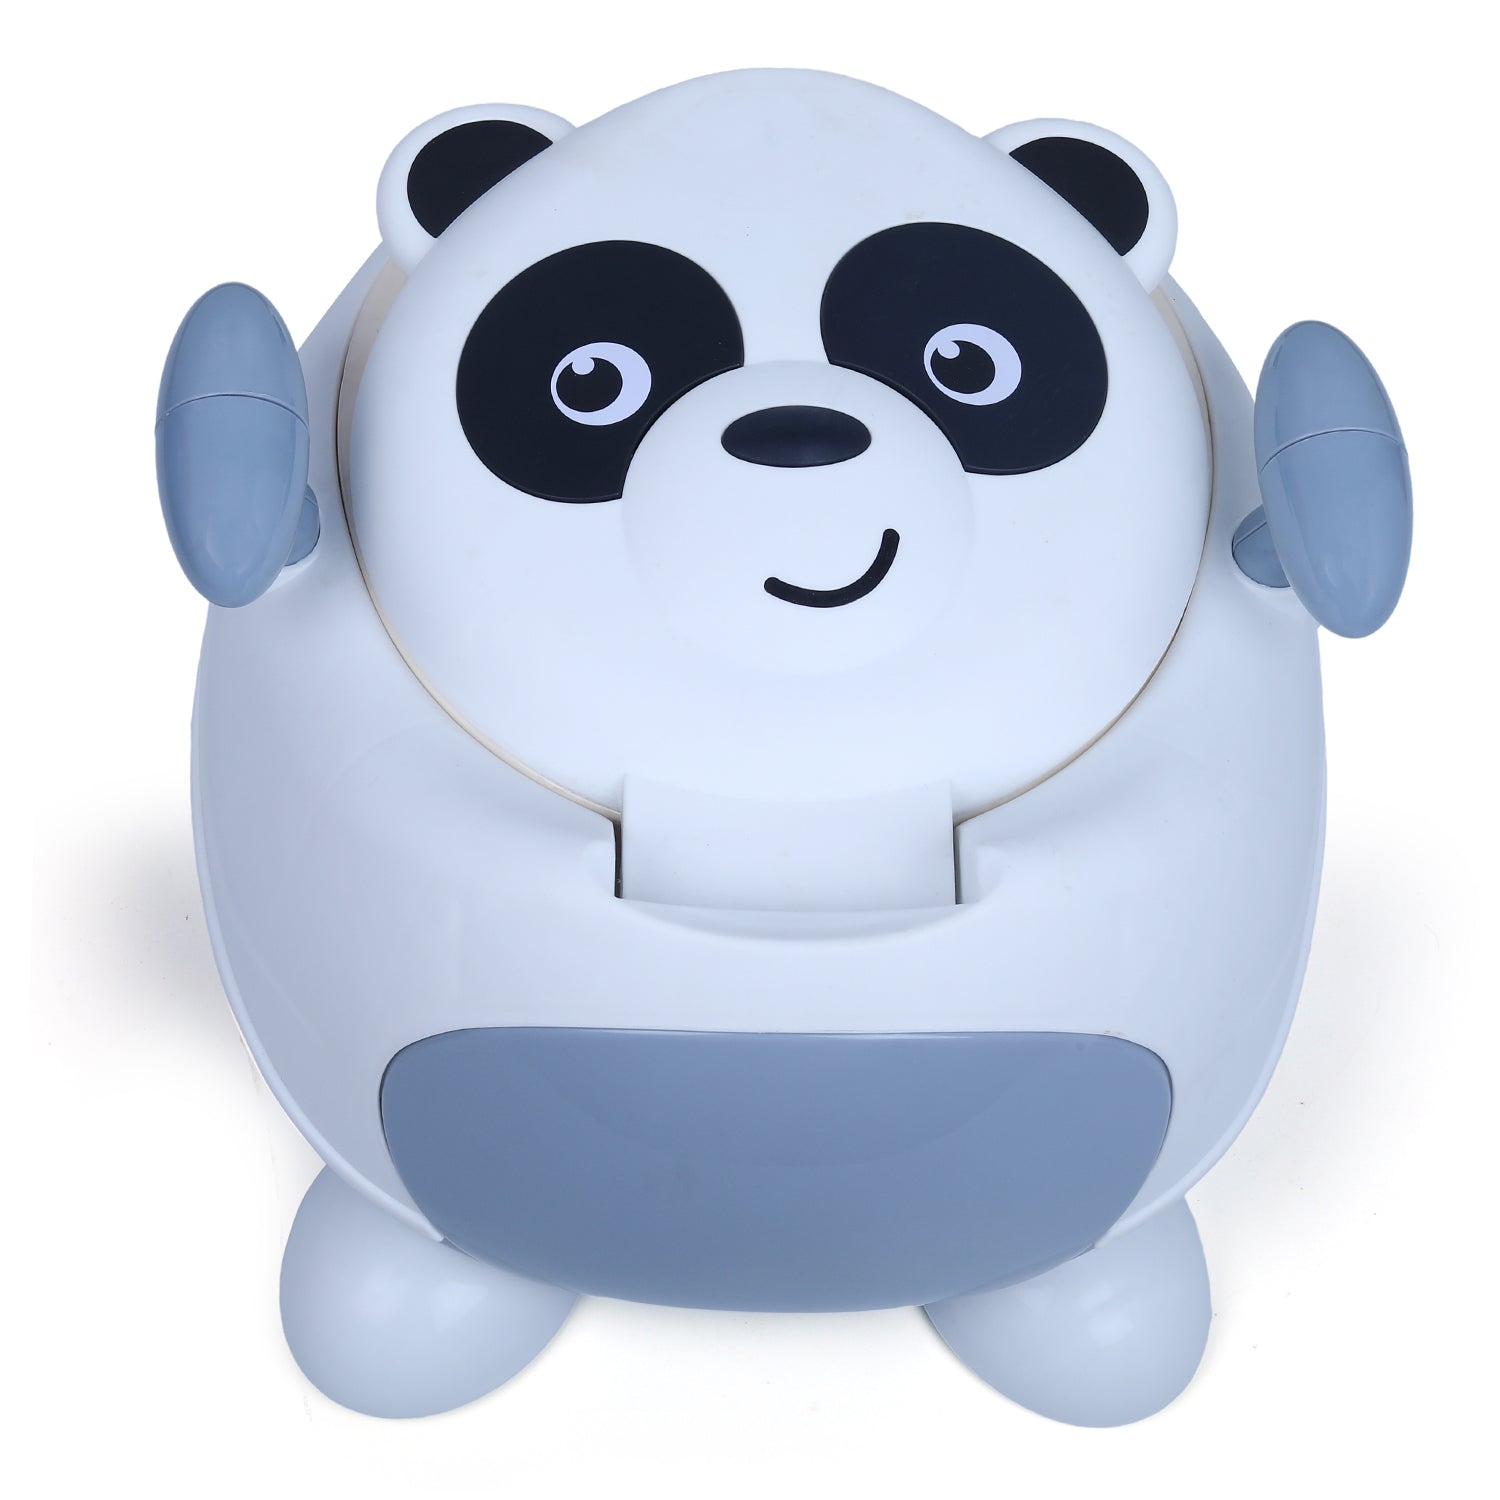 Baby Moo Panda Detachable Lid With Handle For Toilet Training Potty Chair - White - Baby Moo